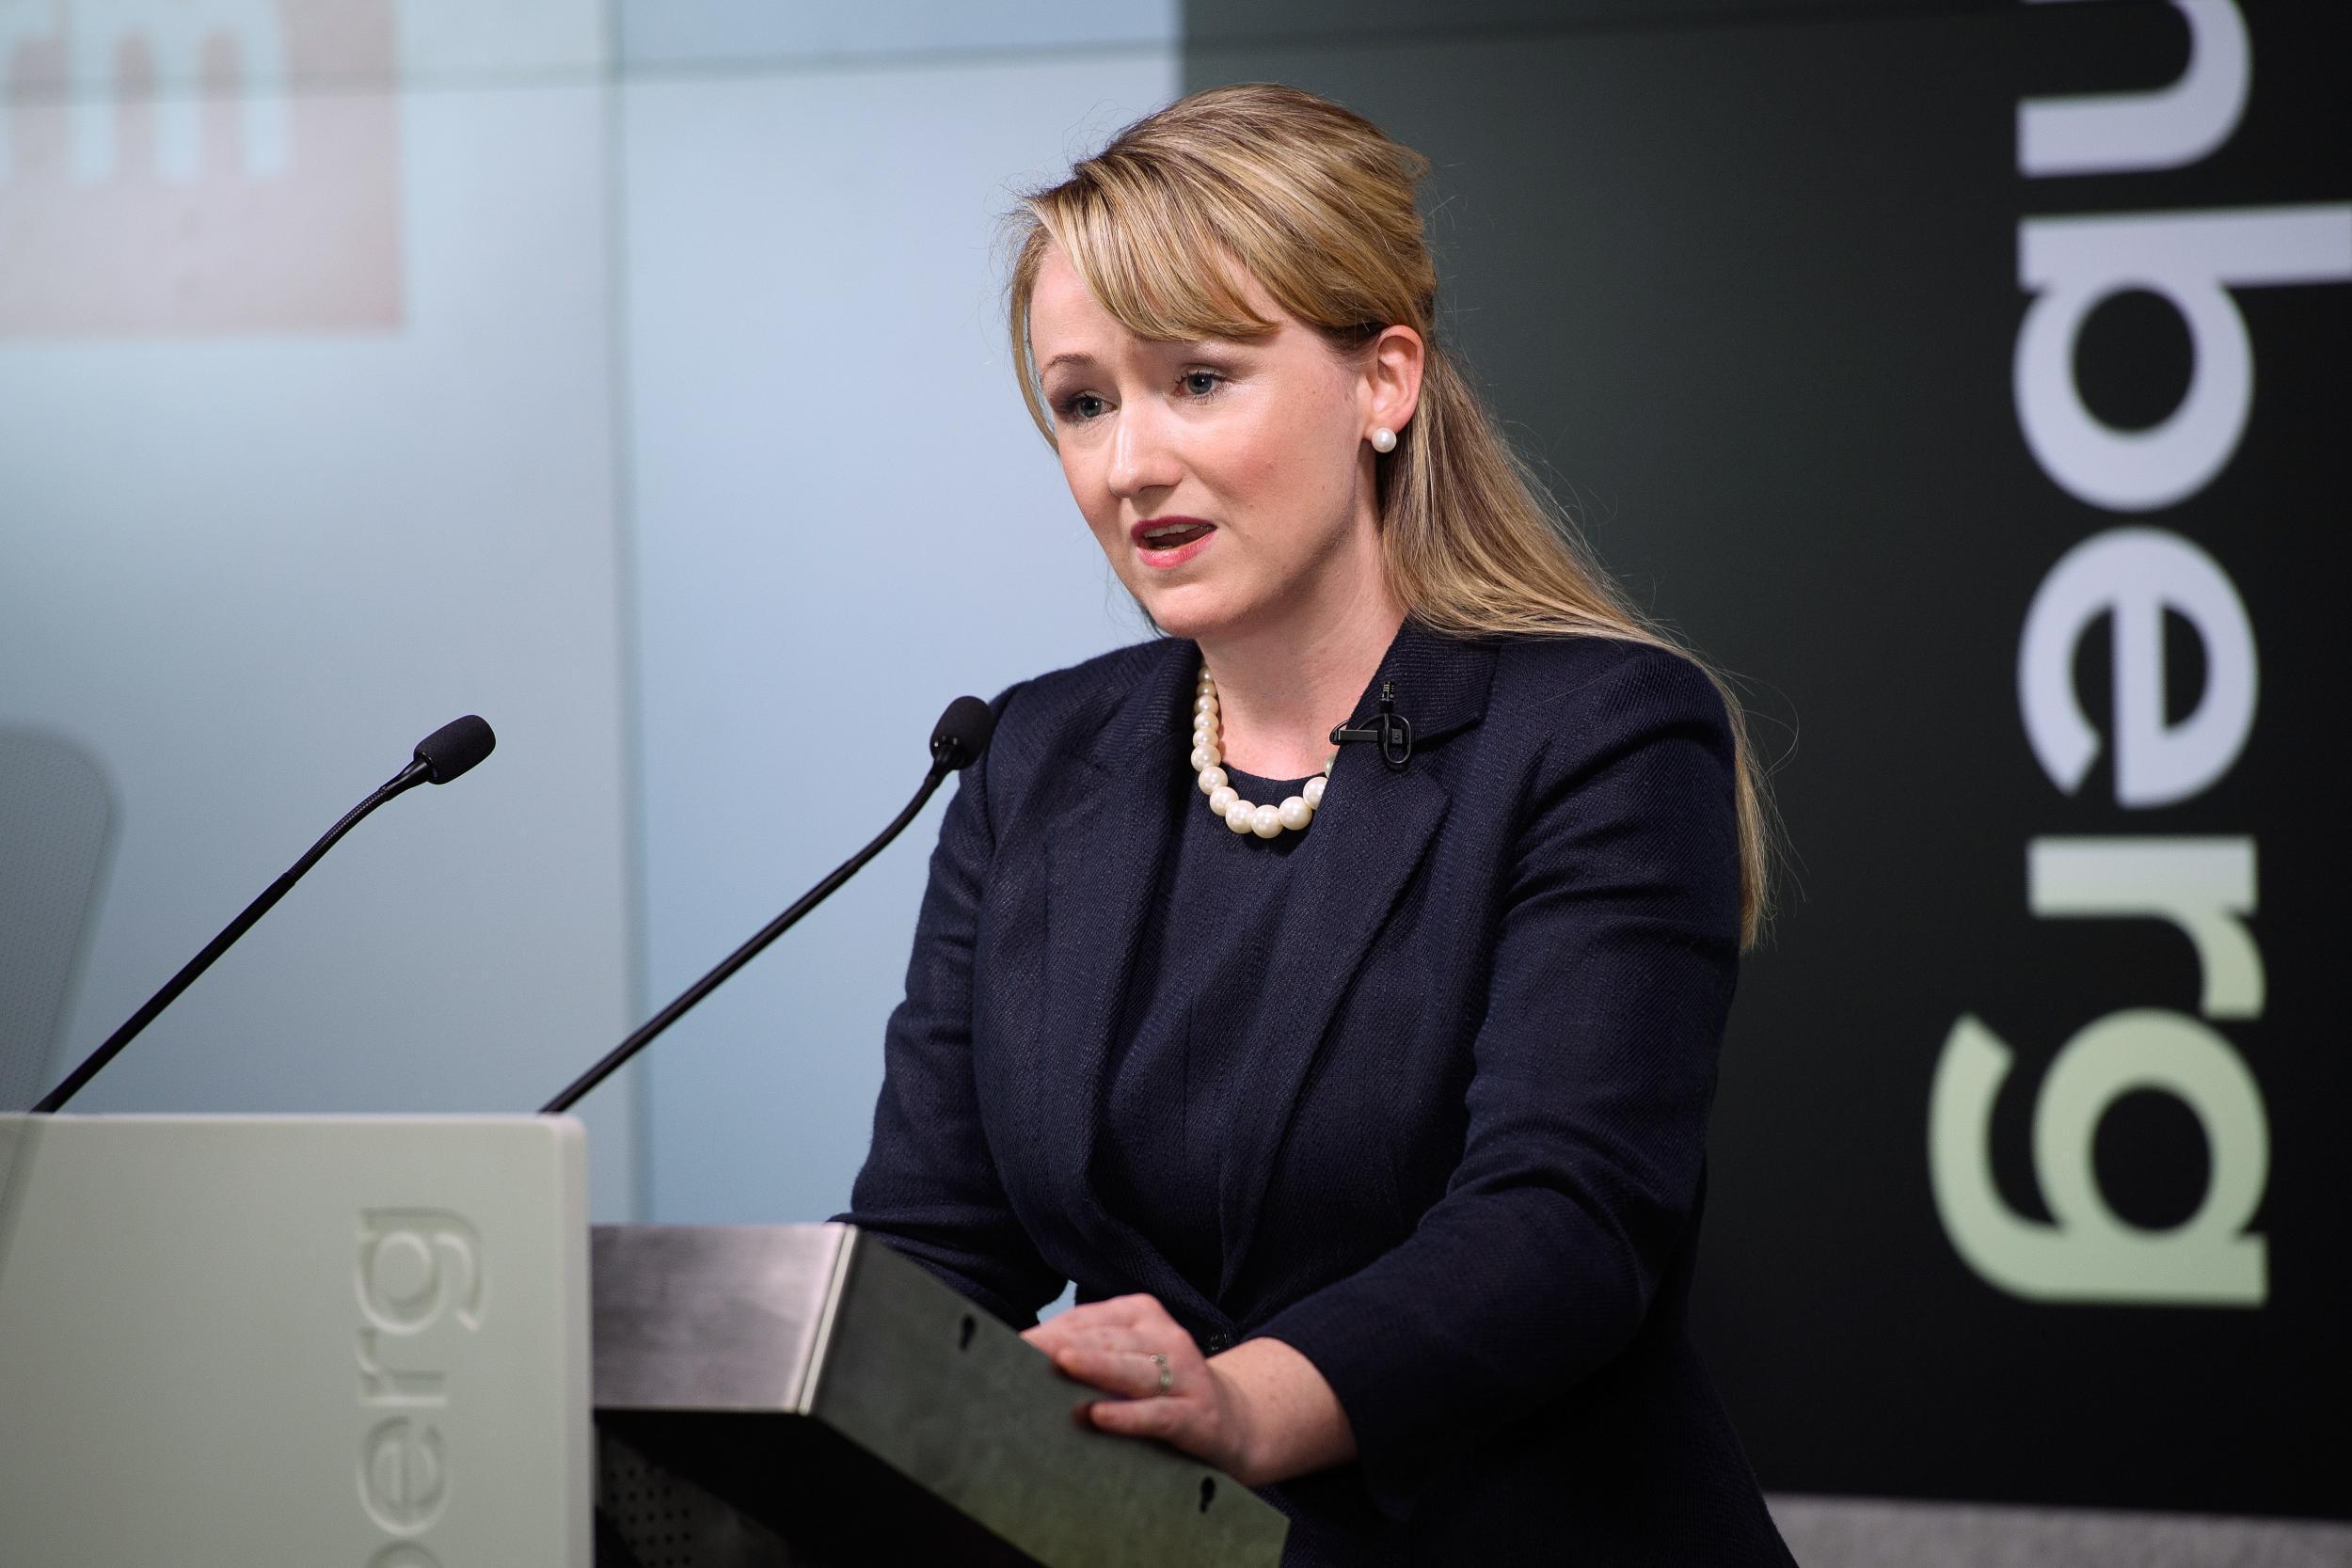 Rebecca Long-Bailey, who replaced Clive Lewis as shadow Business Secretary, got a positive response from the focus group, according to the newspaper report